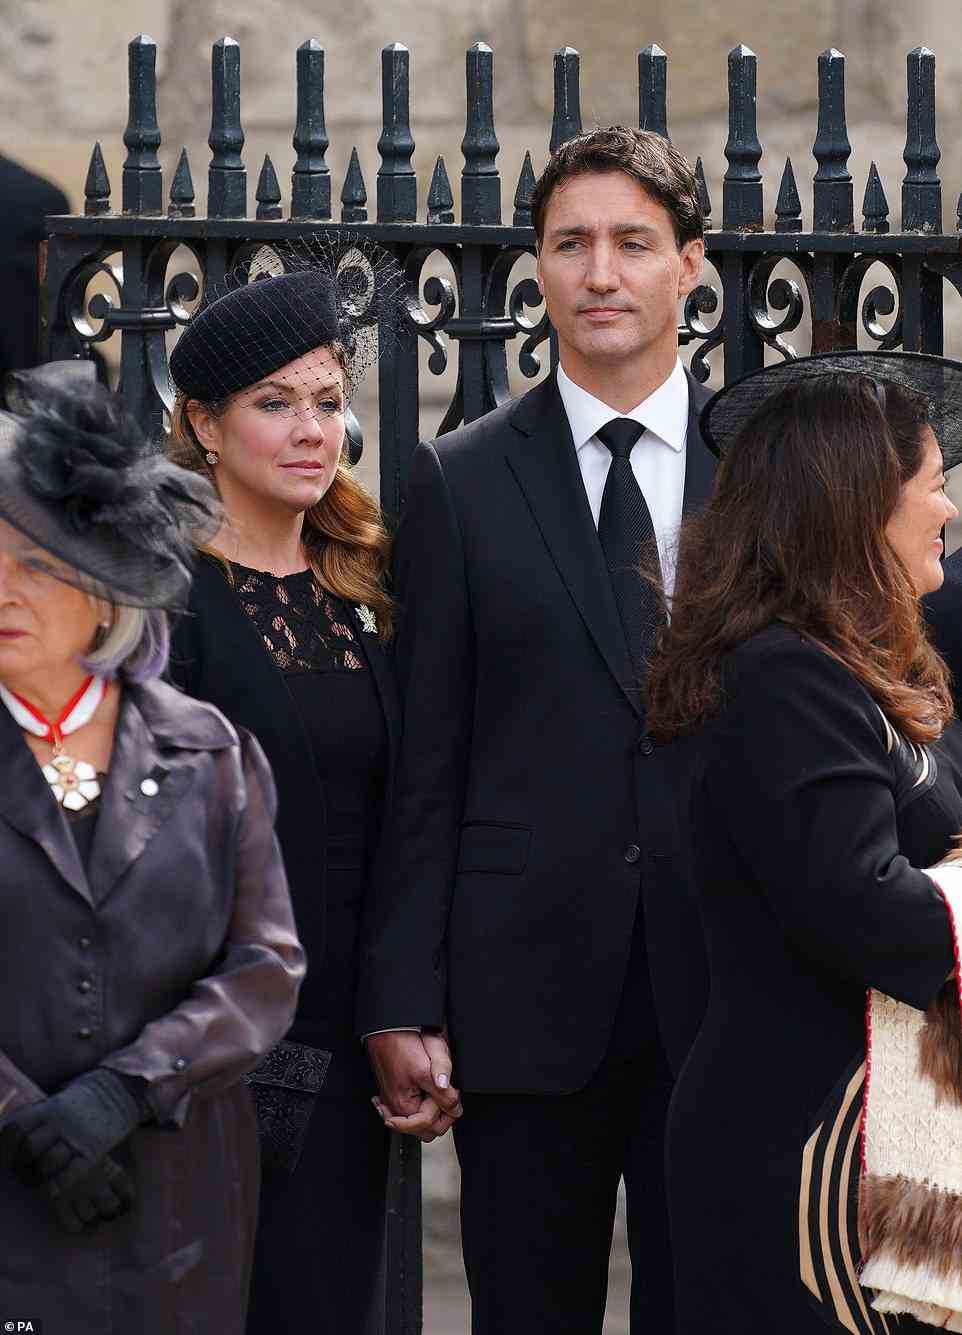 Trudeau and his wife pictured outside Westminster Abbey following the funeral of Queen Elizabeth II